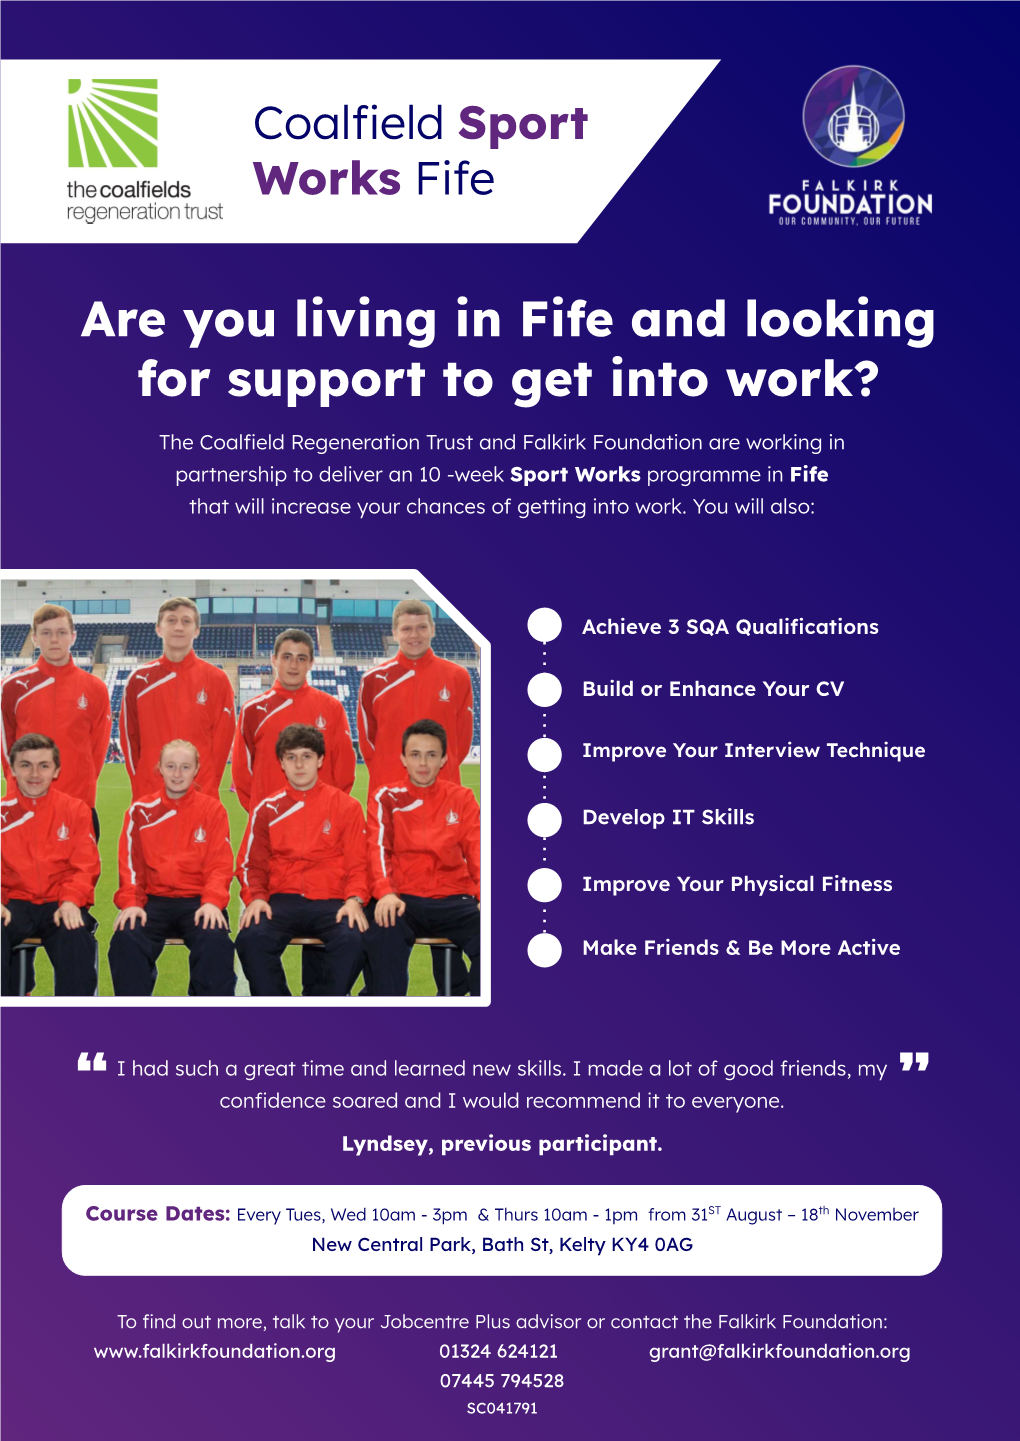 Are You Living in Fife and Looking for Support to Get Into Work?